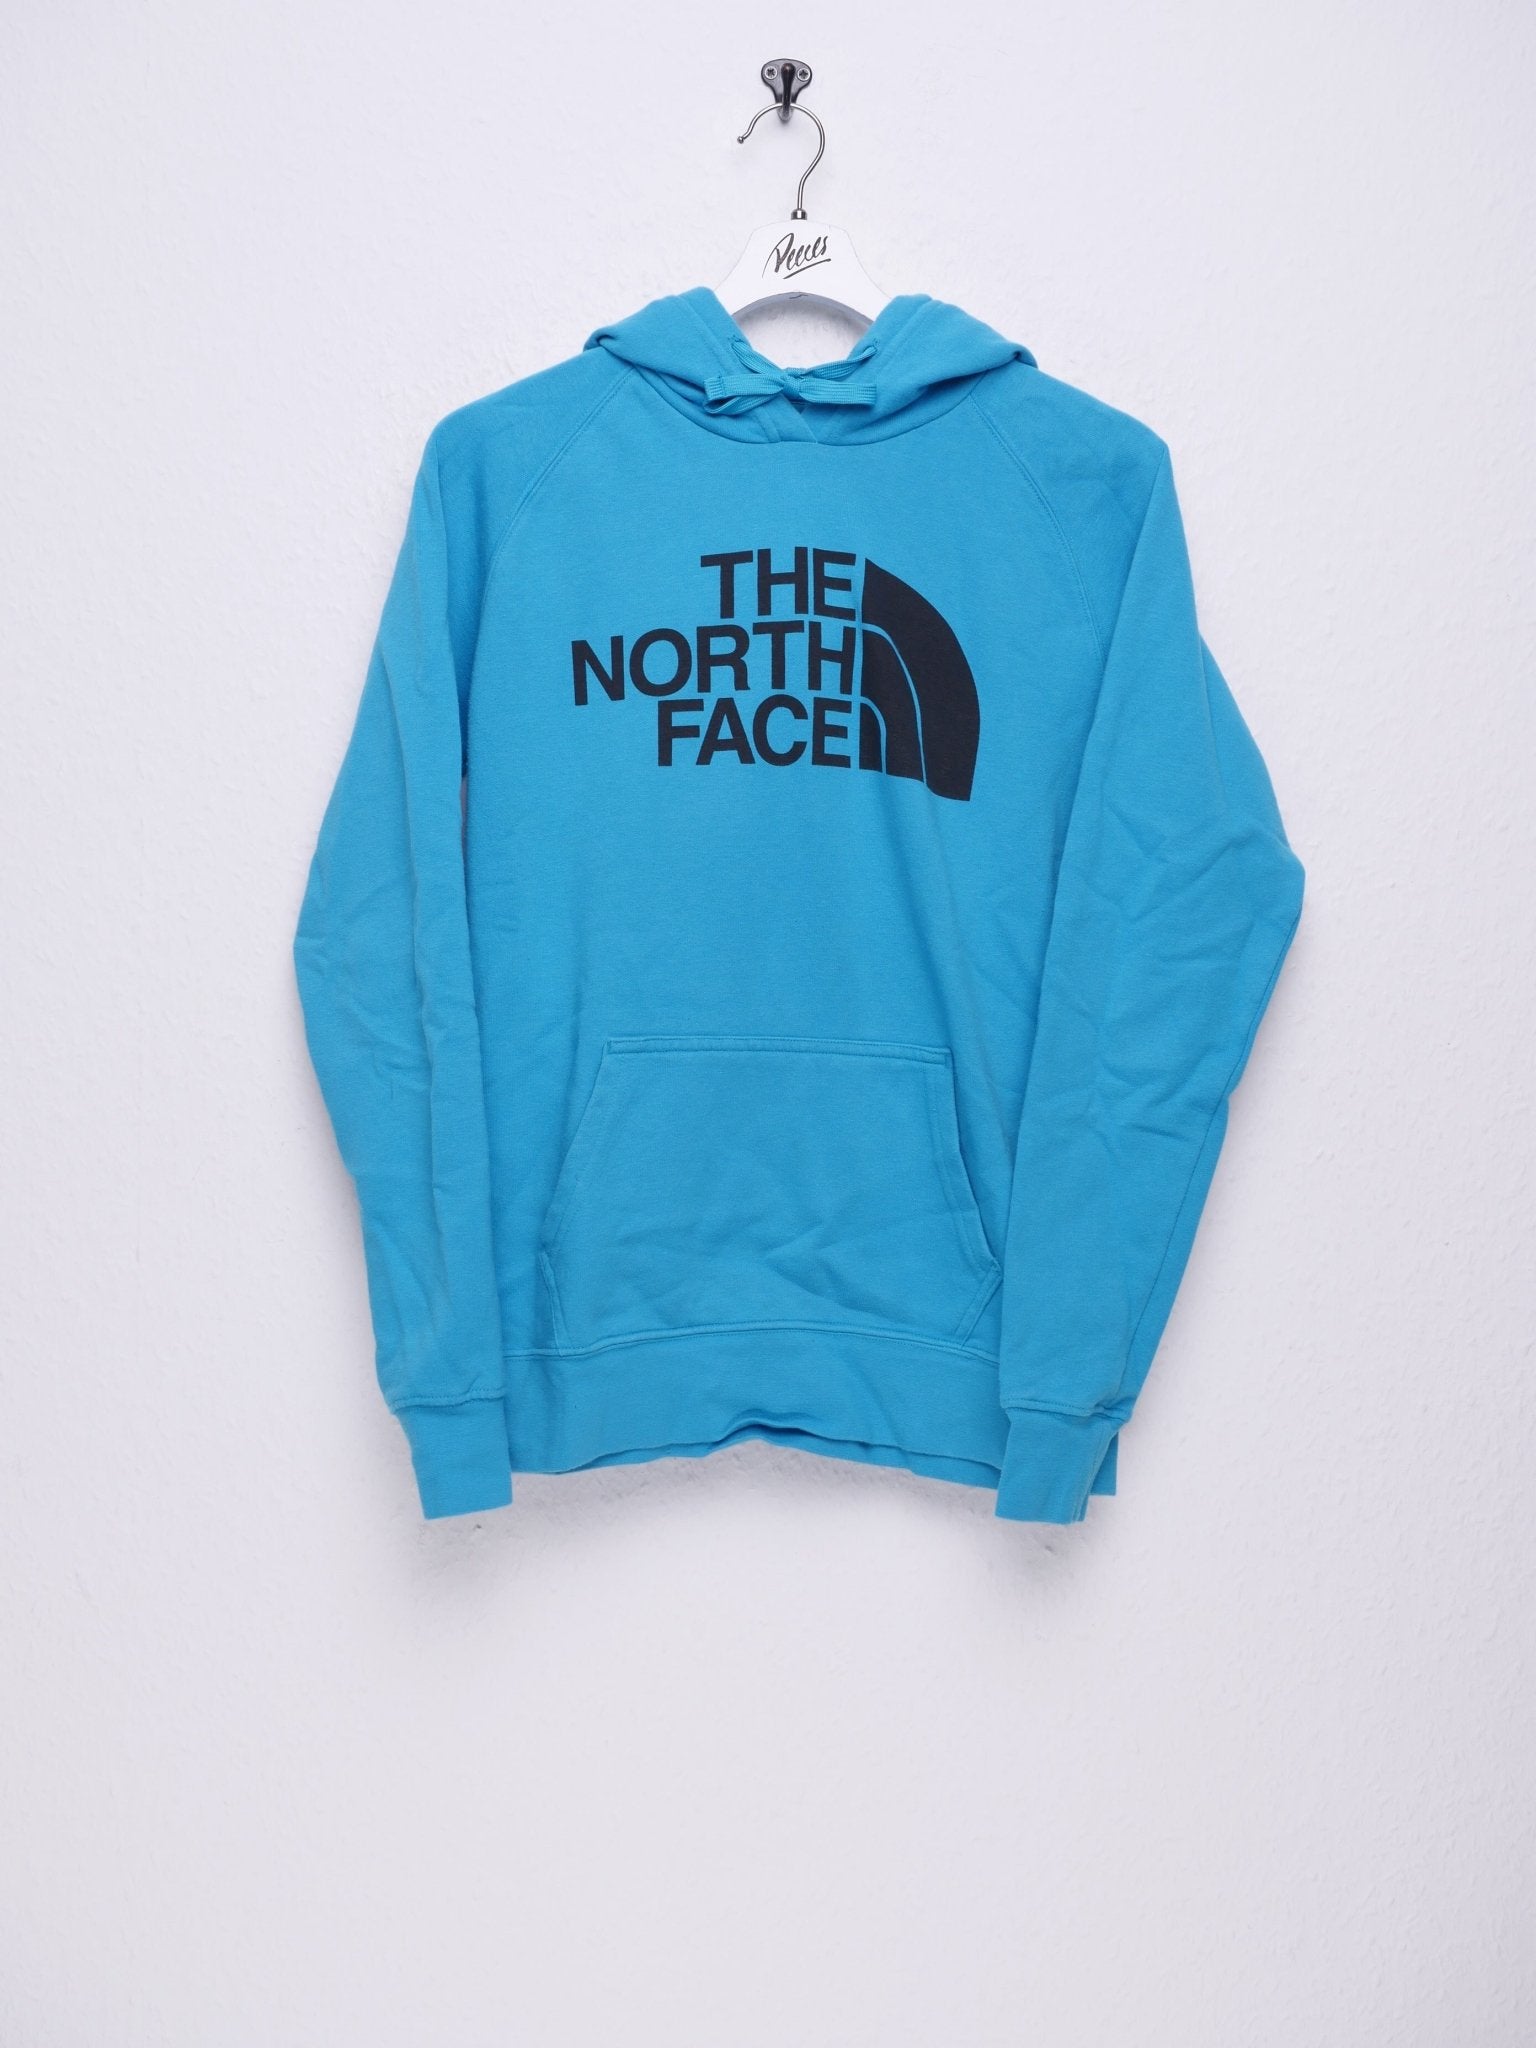 The North Face printed Big Logo blue basic Hoodie - Peeces